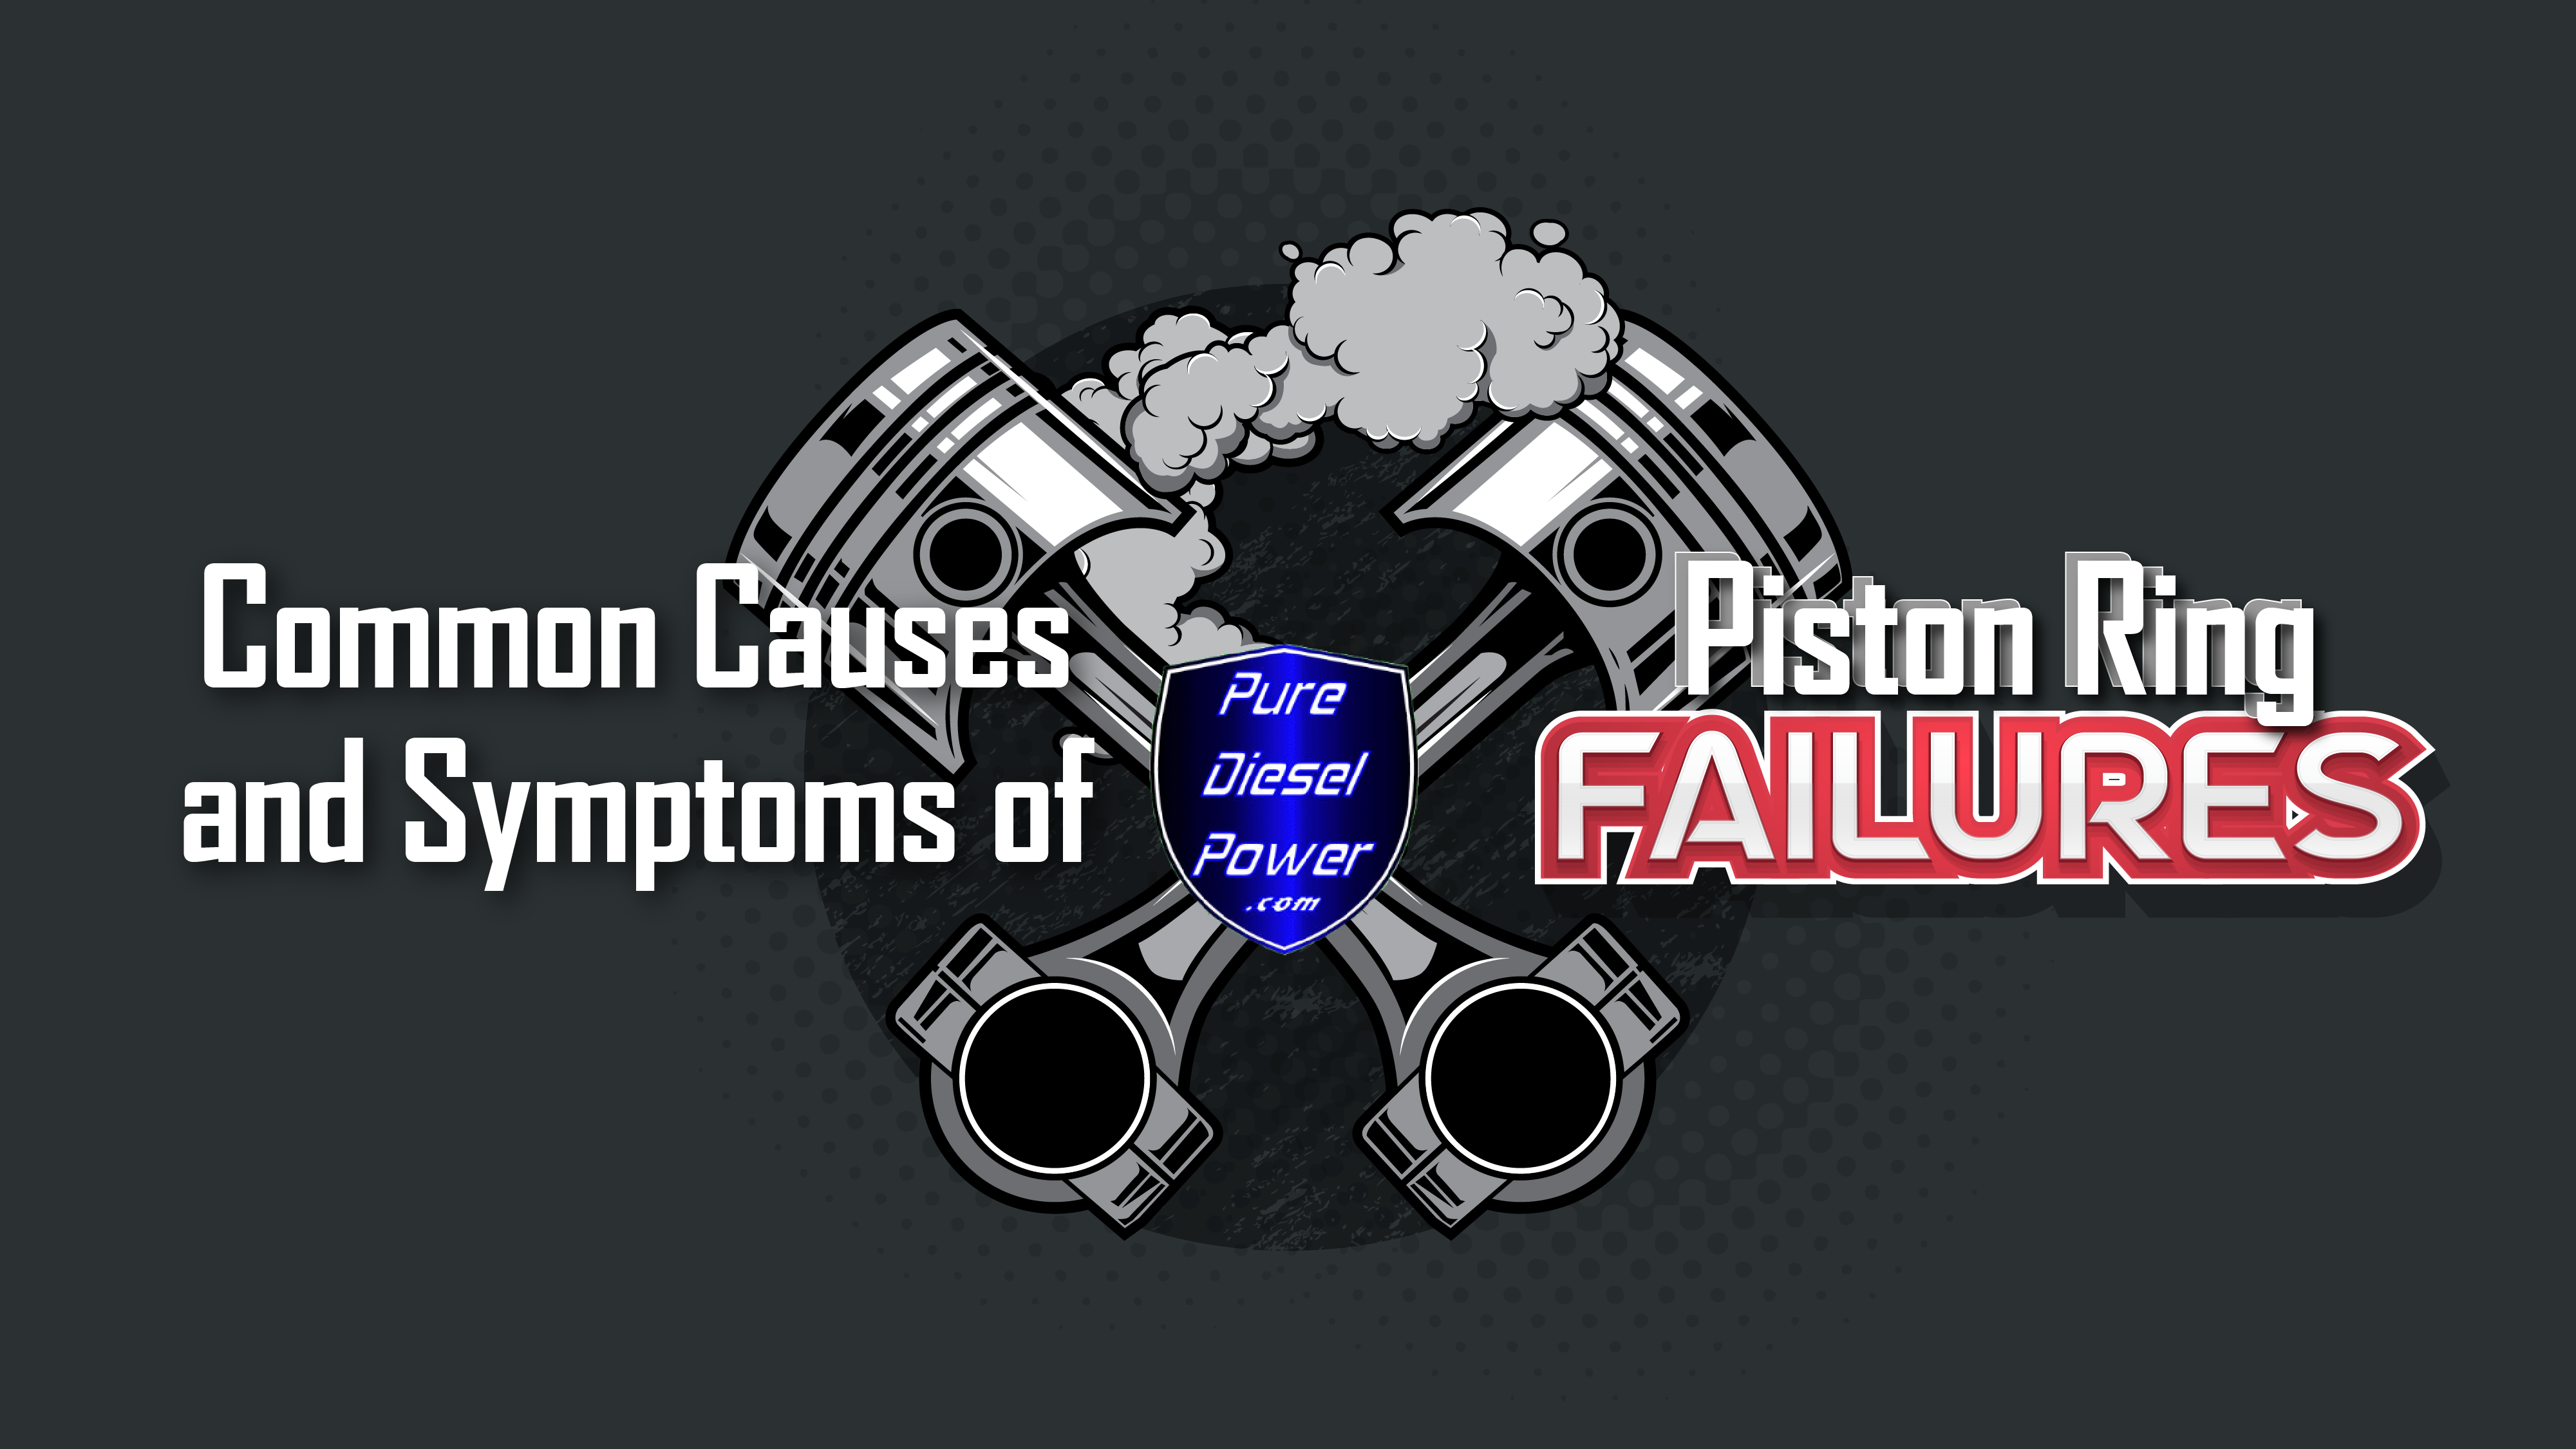 Common Causes and Symptoms of Piston Ring Failures